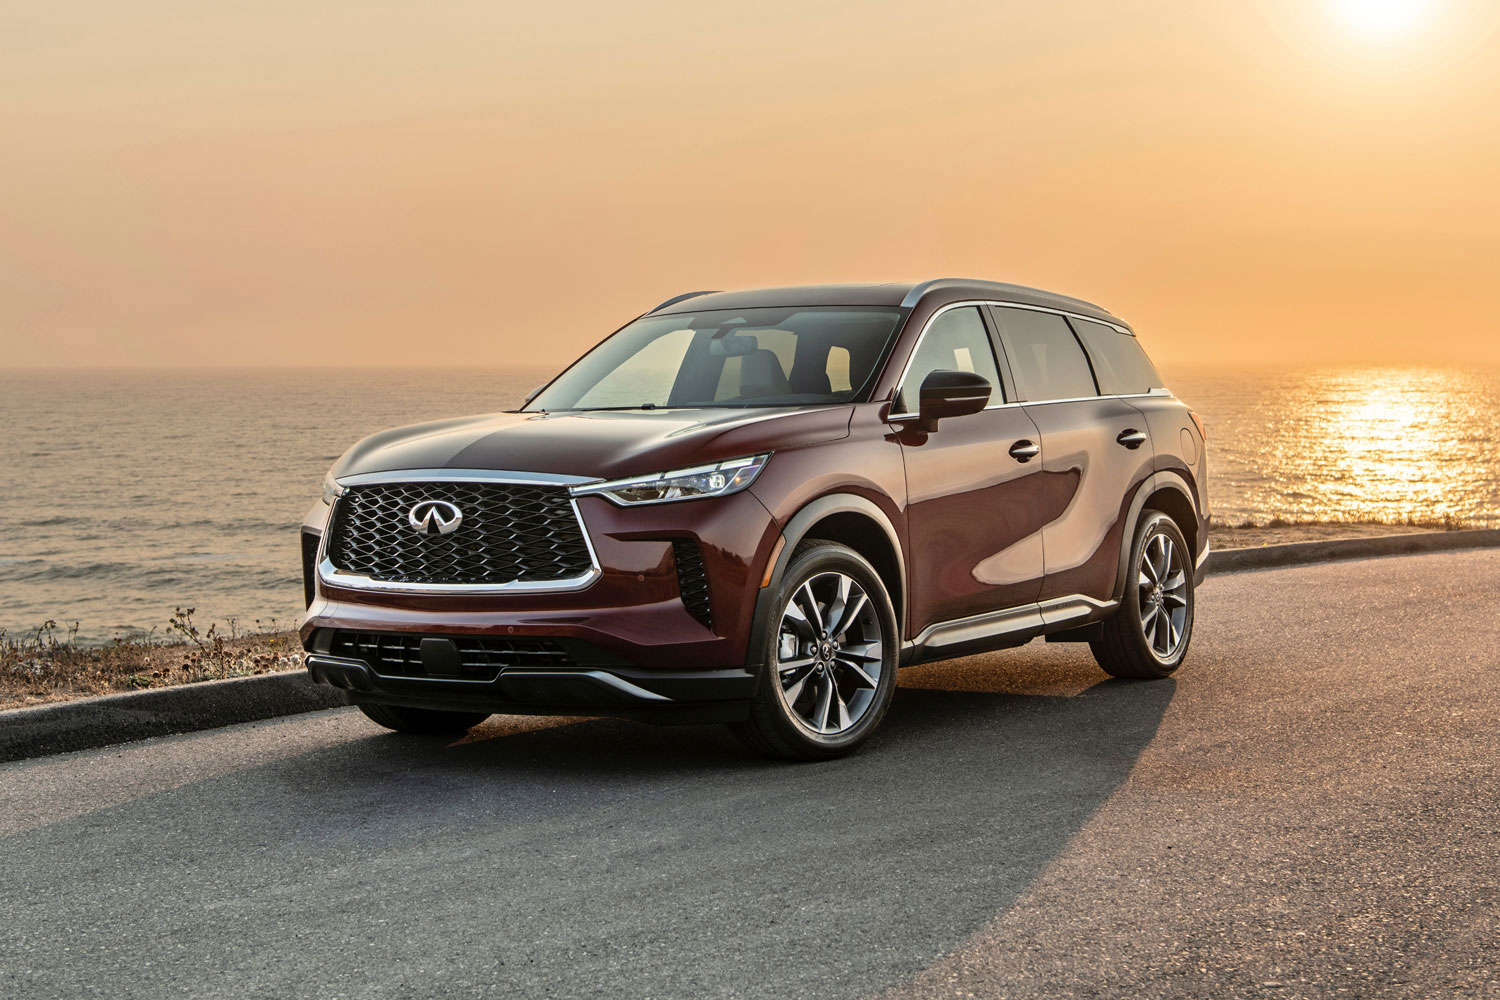 2022 INFINITI QX60 Reviews, Price, MPG and More | Capital One Auto Navigator